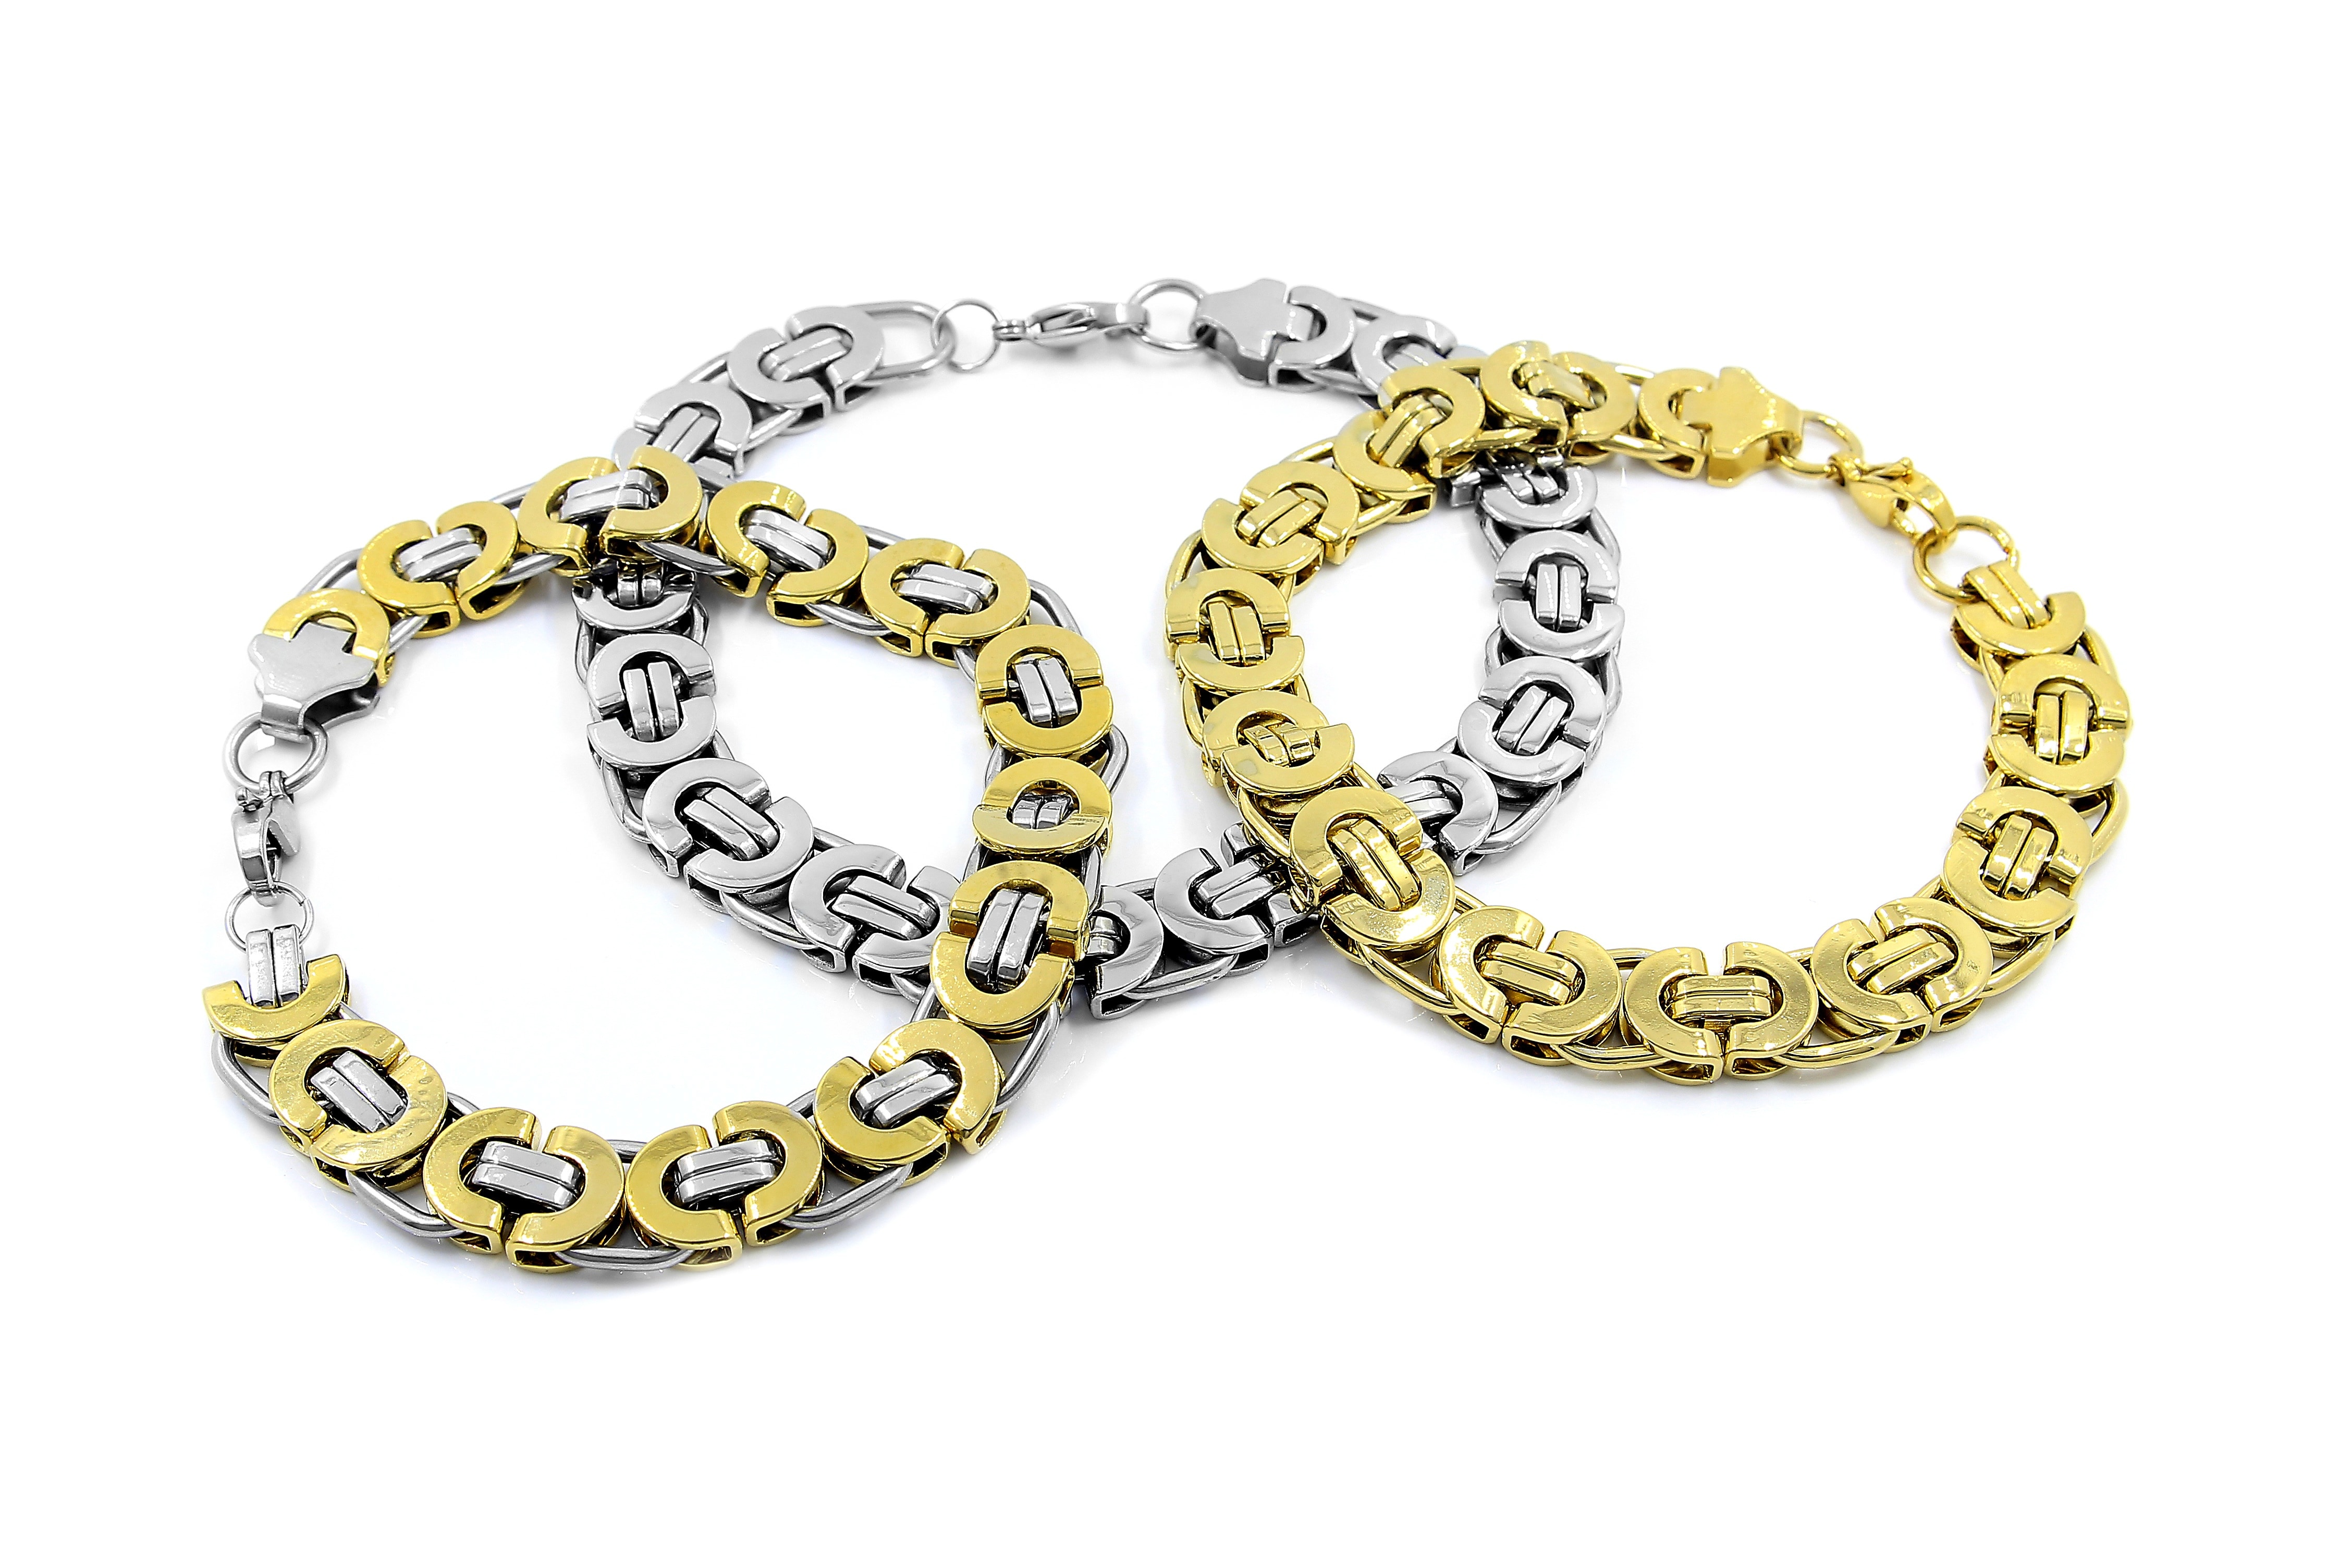 3 gold and silver chain link bracelets